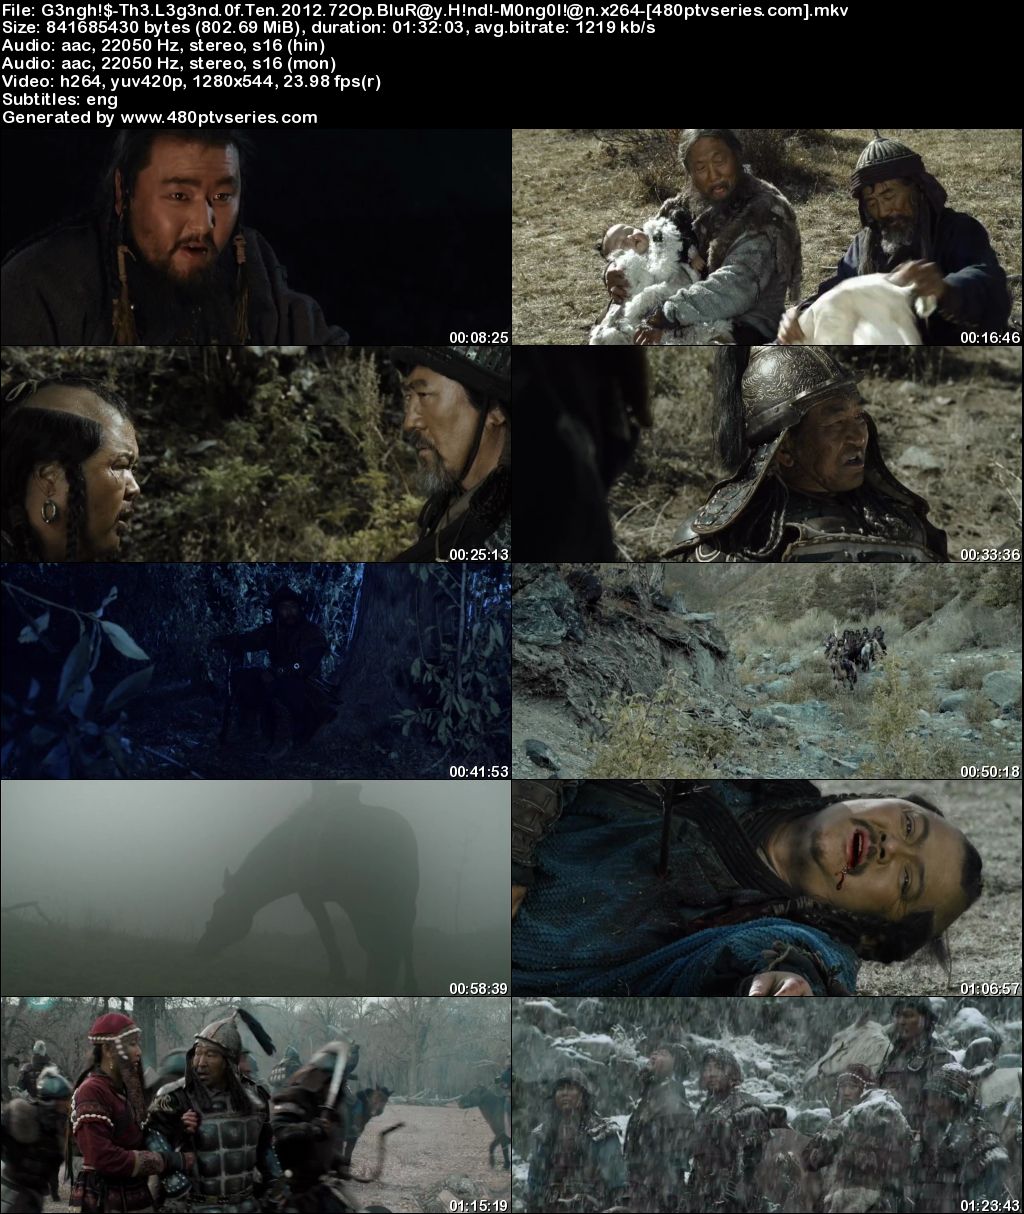 Download Genghis: The Legend of the Ten (2012) 800MB Full Hindi Dual Audio Movie Download 720p BluRay Free Watch Online Full Movie Download Worldfree4u 9xmovies